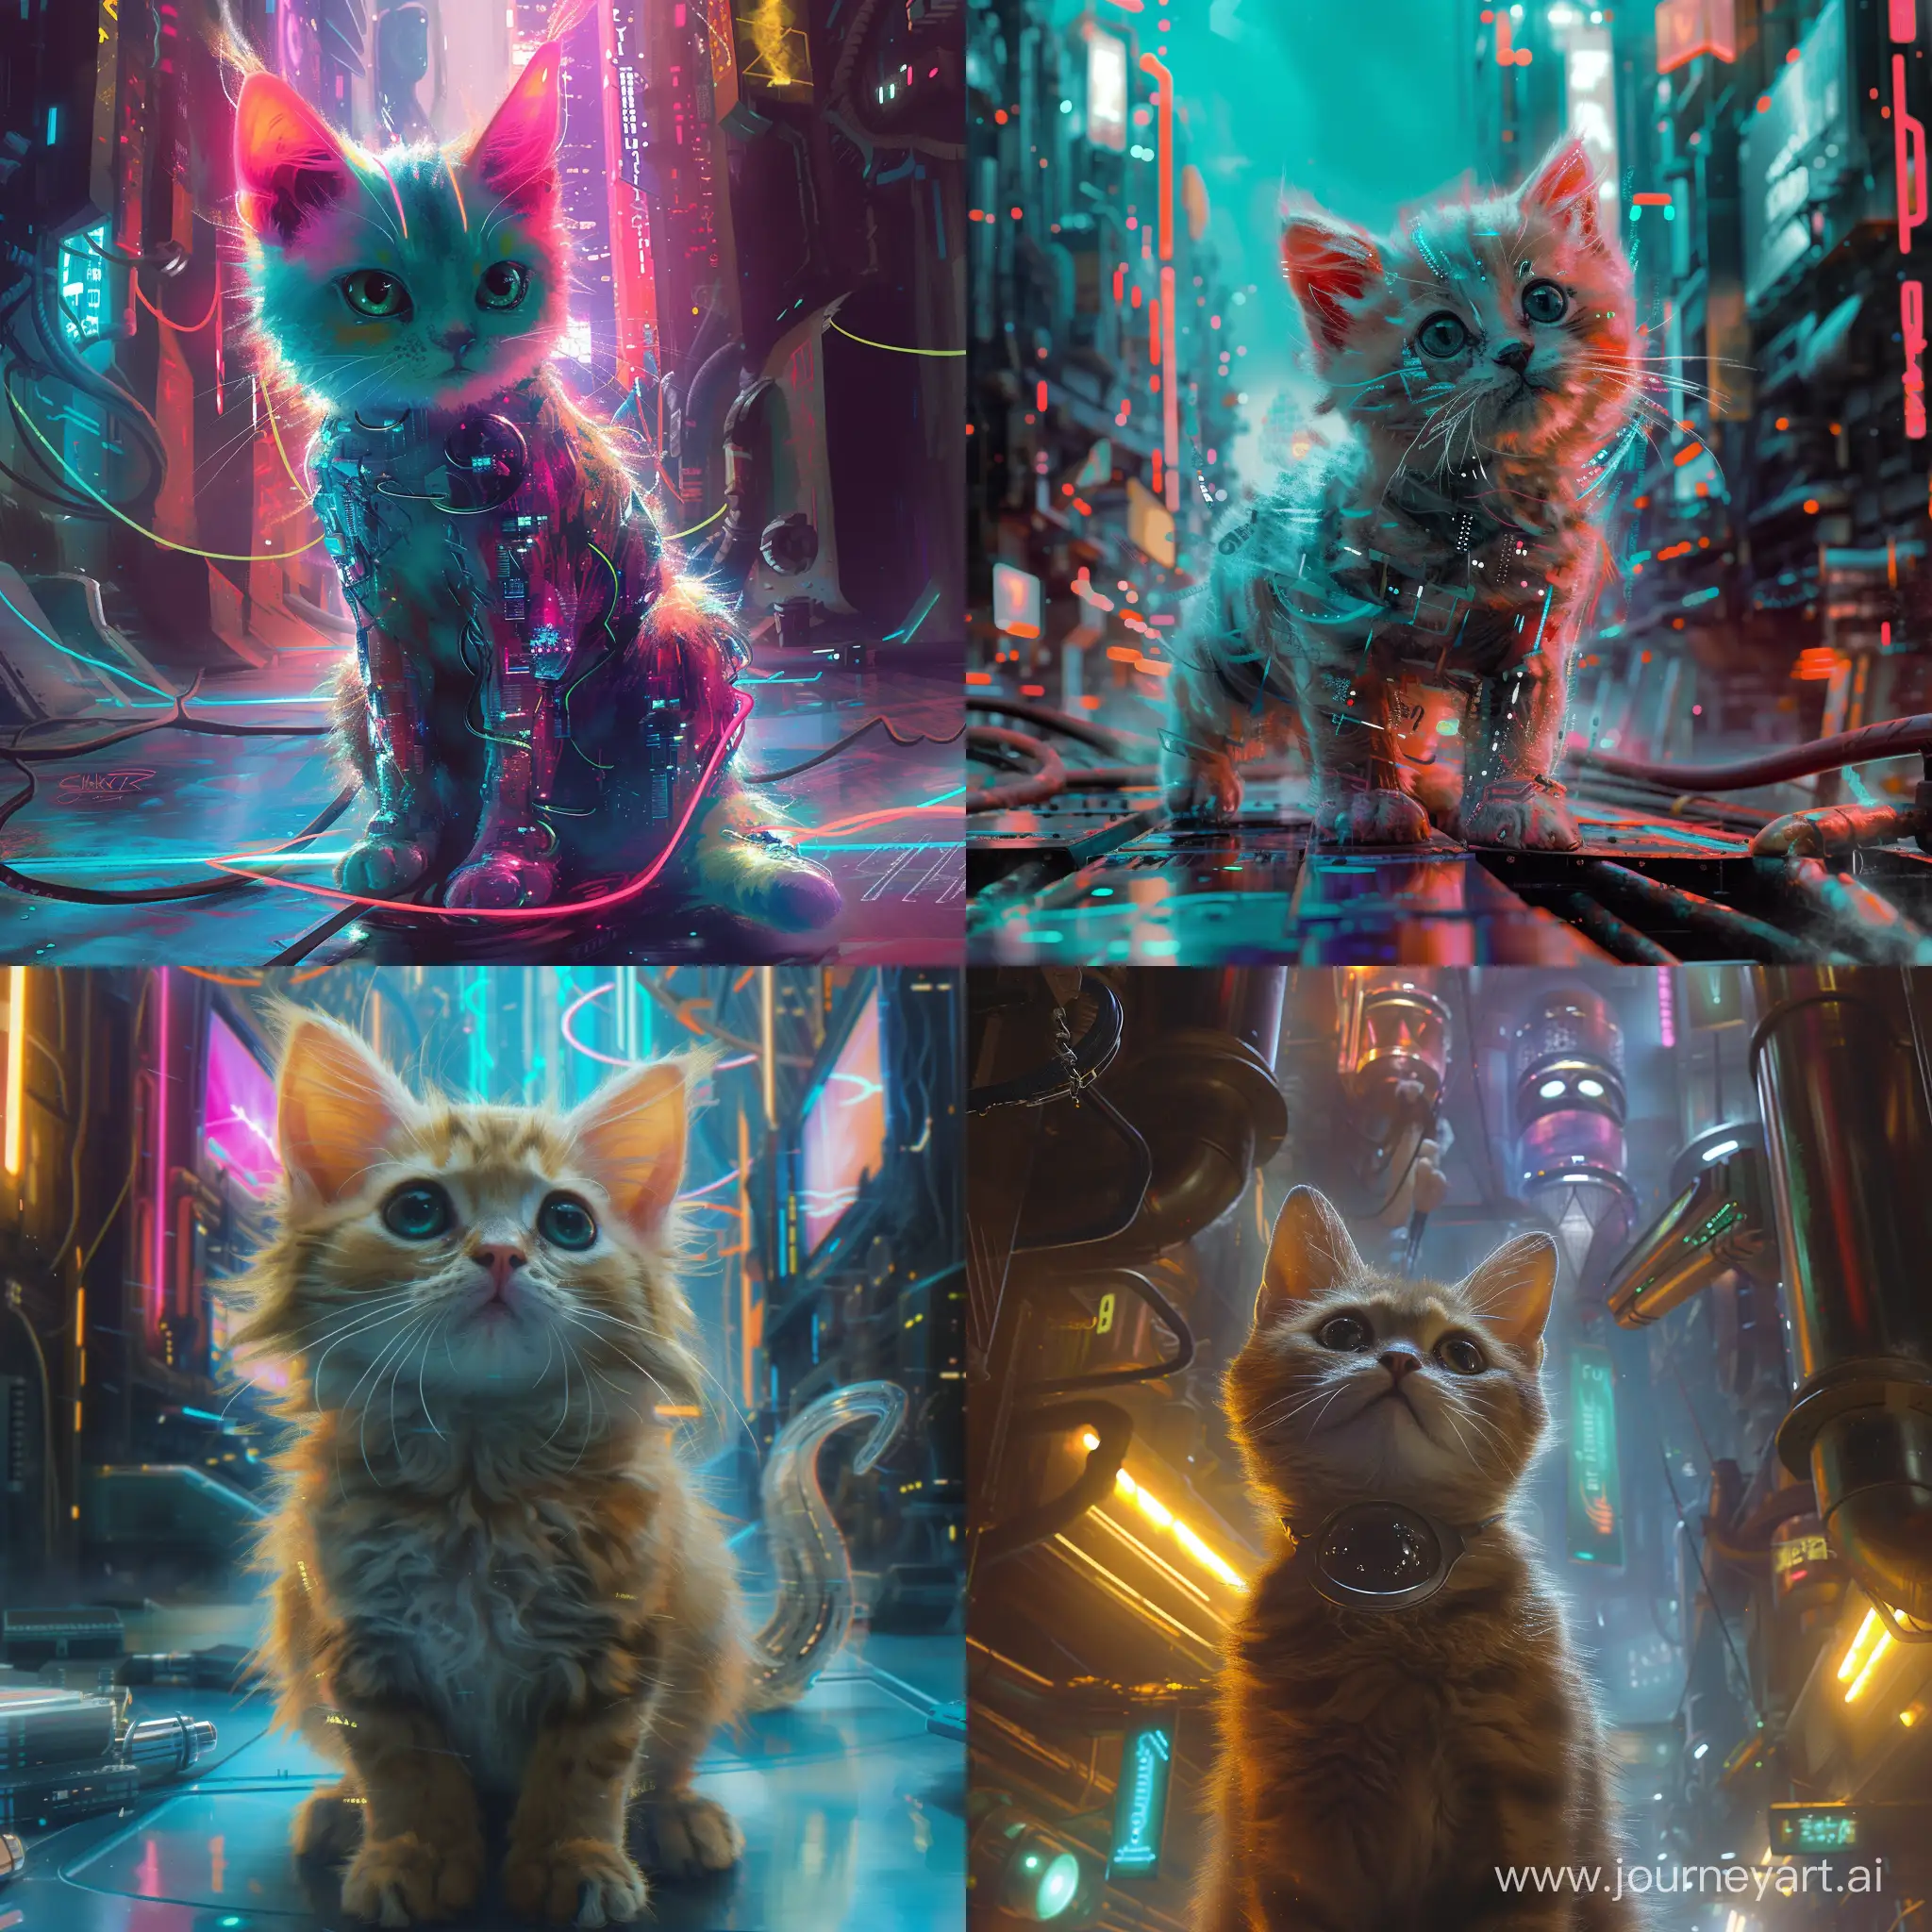 Create a charming image for a bizarre story involving a single female kitty in the style of cyberpunk 2077. Capture the charming essence of this unique creature in a magical setting